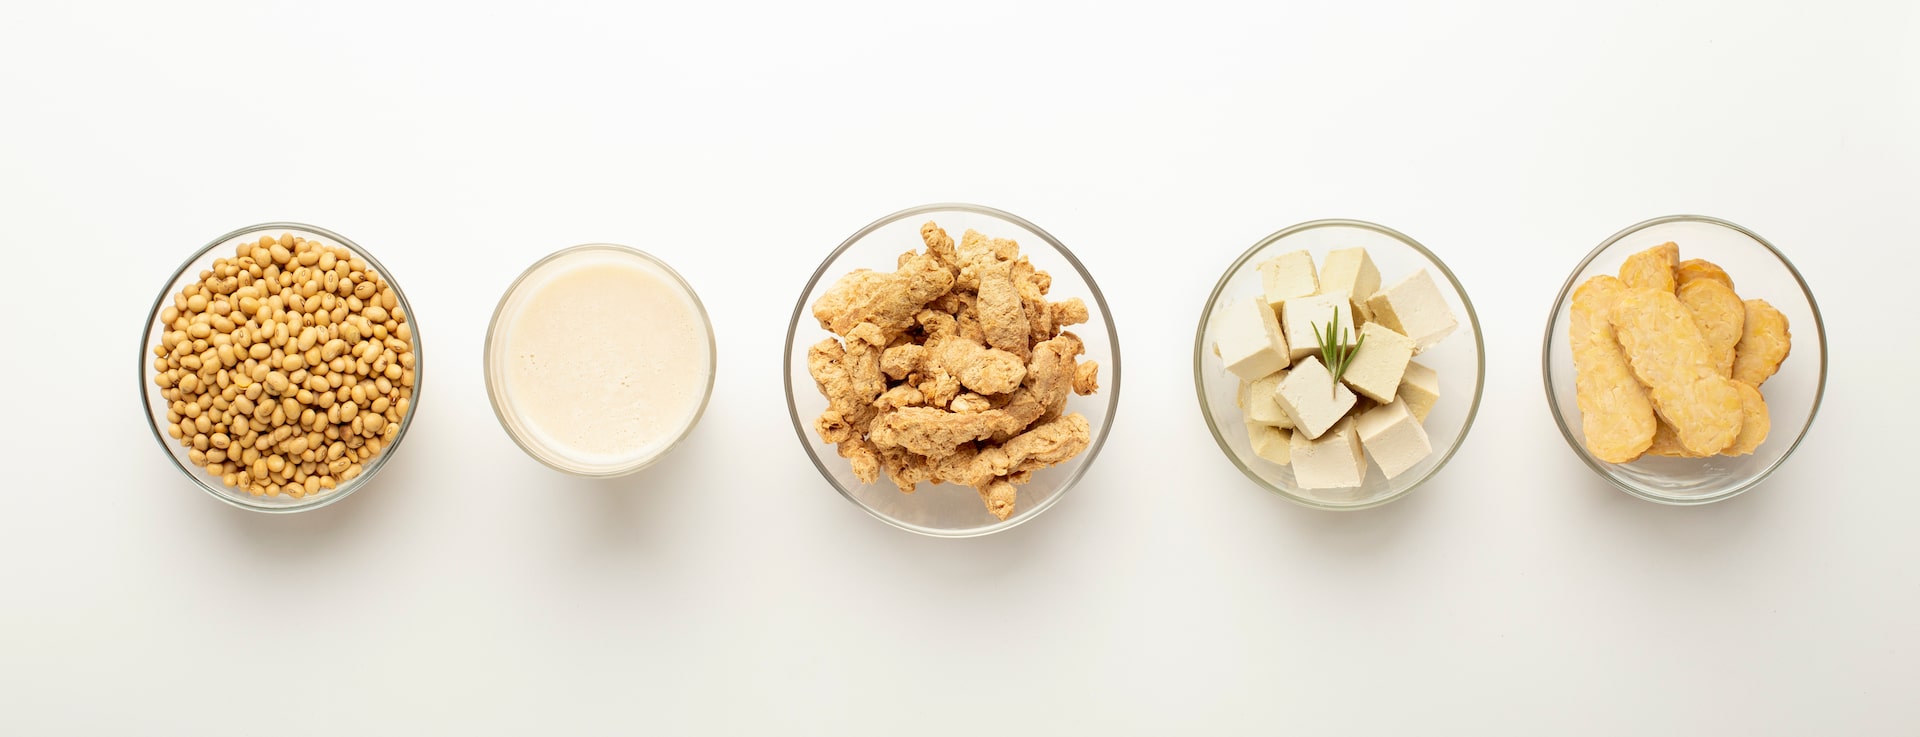 Soybeans, soy milk, soymeat, tofu and tempeh in bowls on white background, panorama